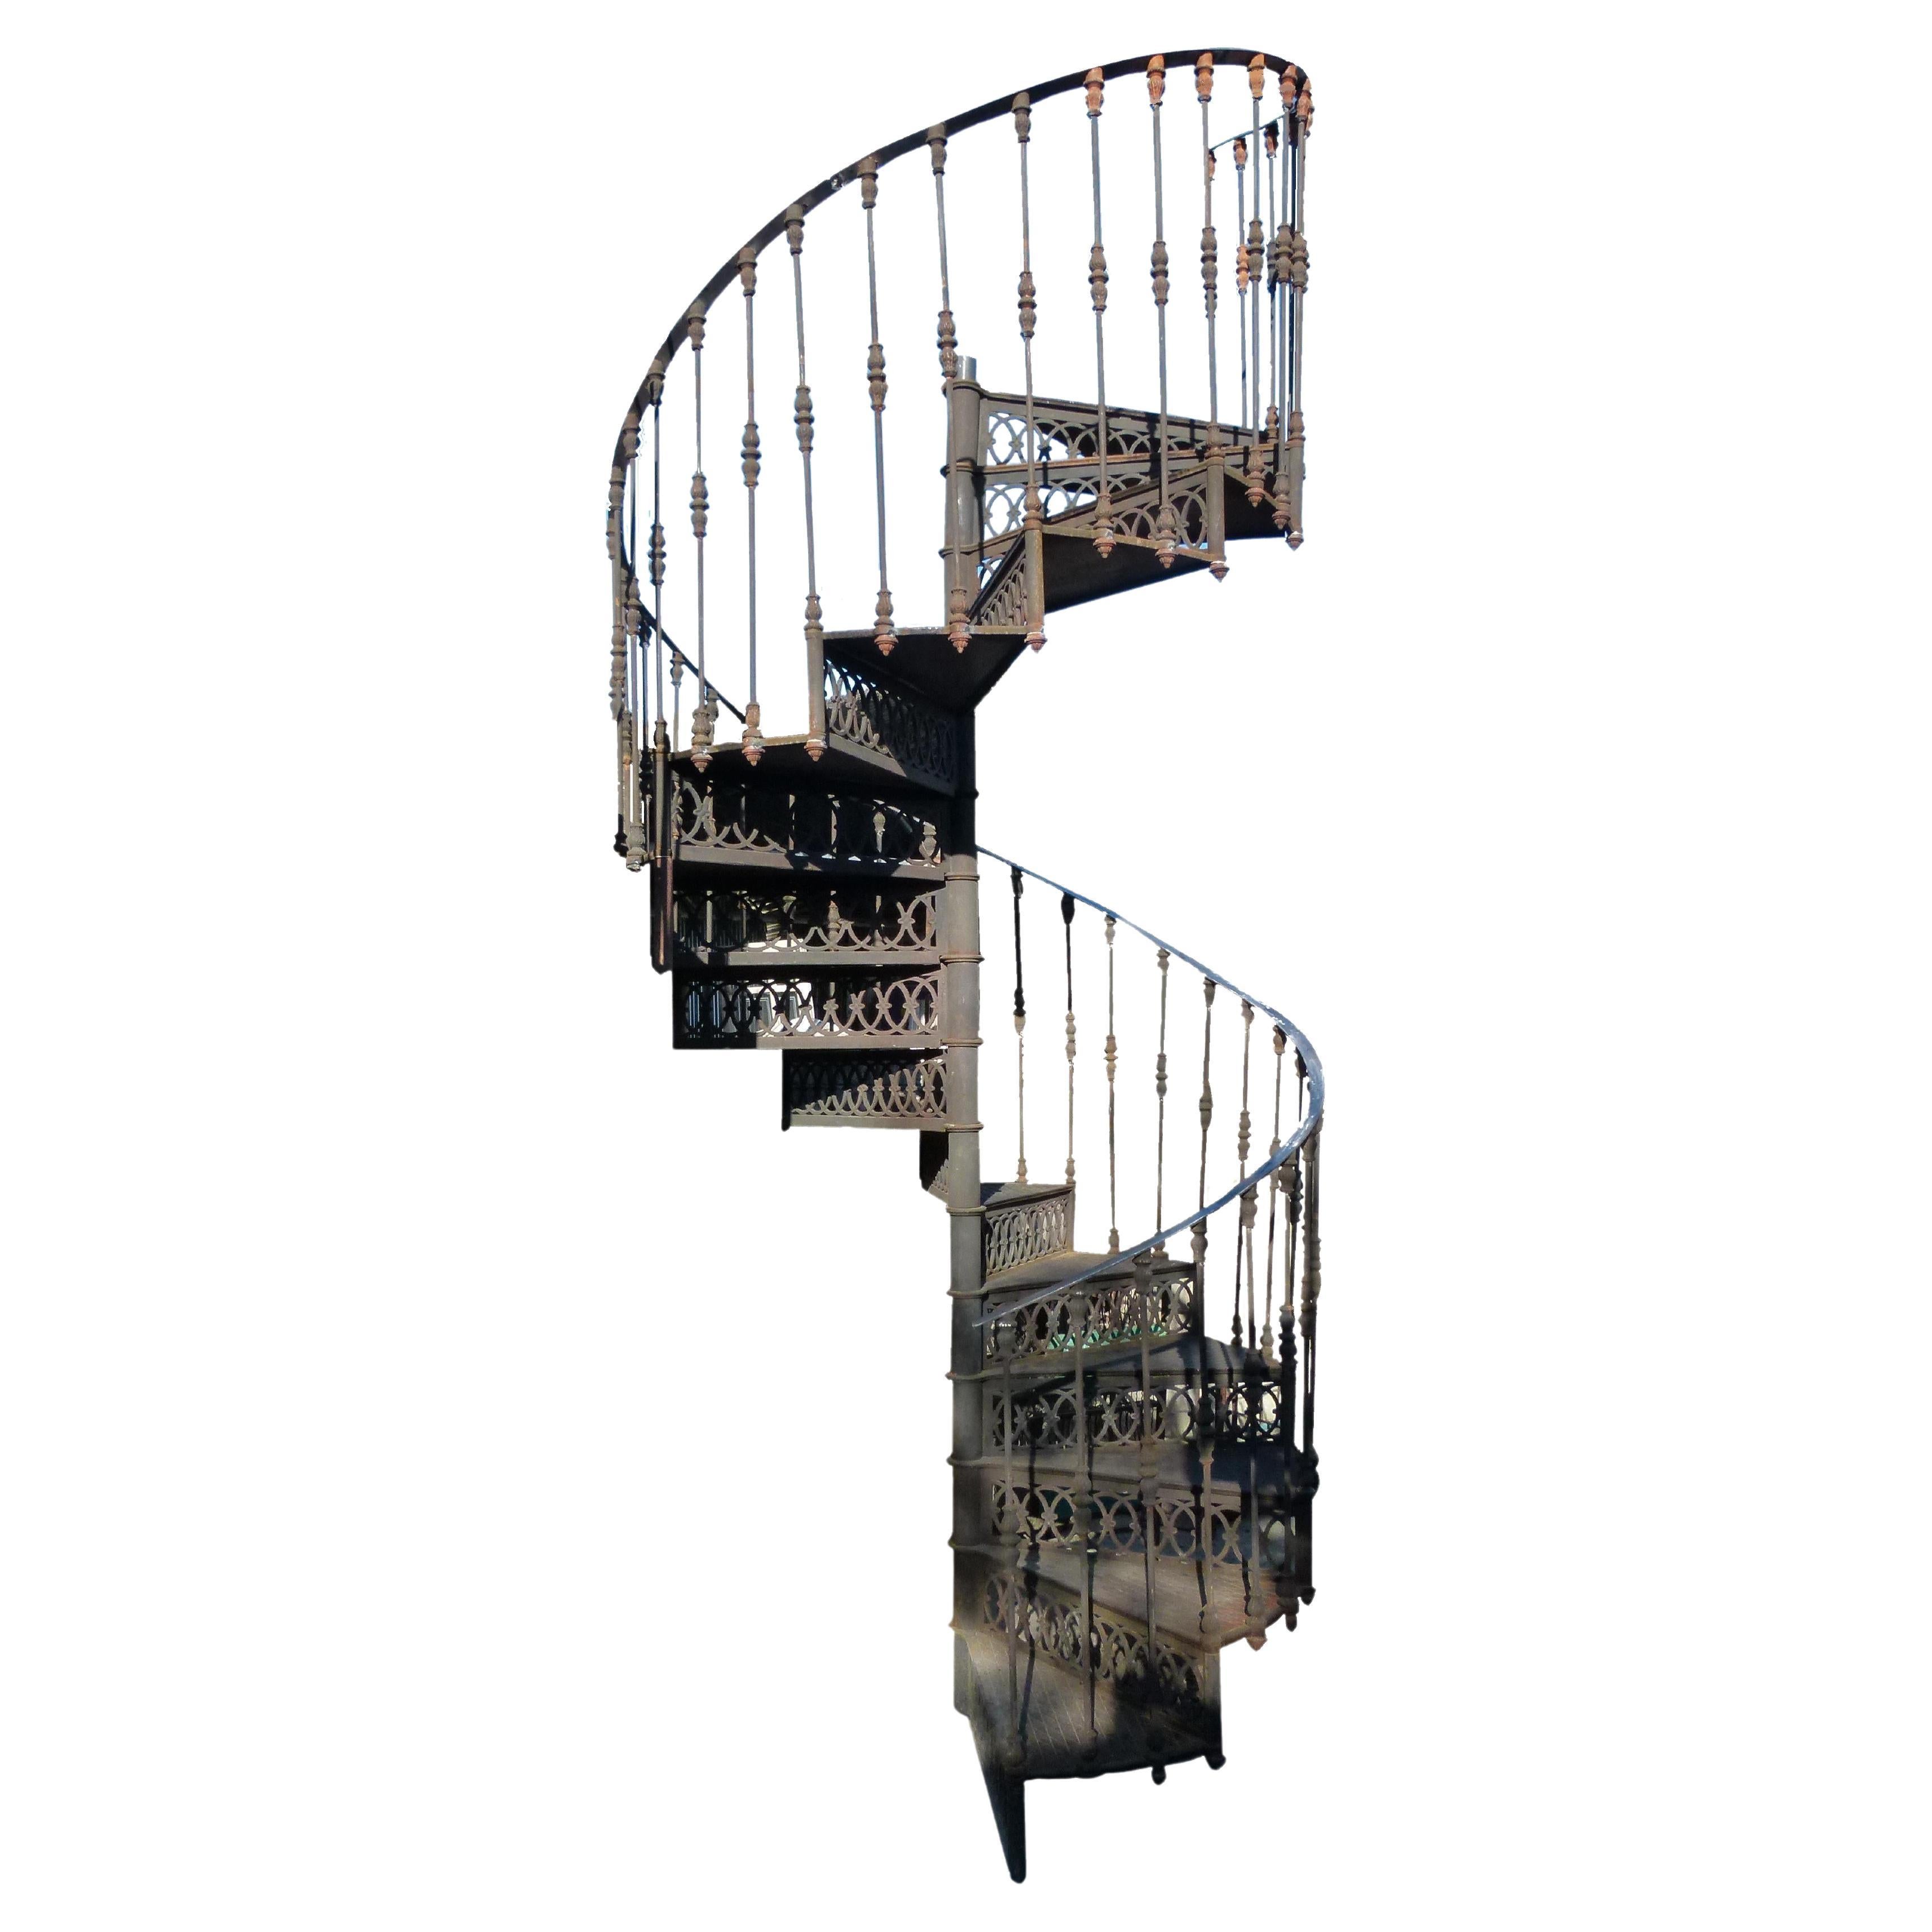 20th Century Art Nouveau Style Cast Iron Spiral Staircase from Spain For Sale